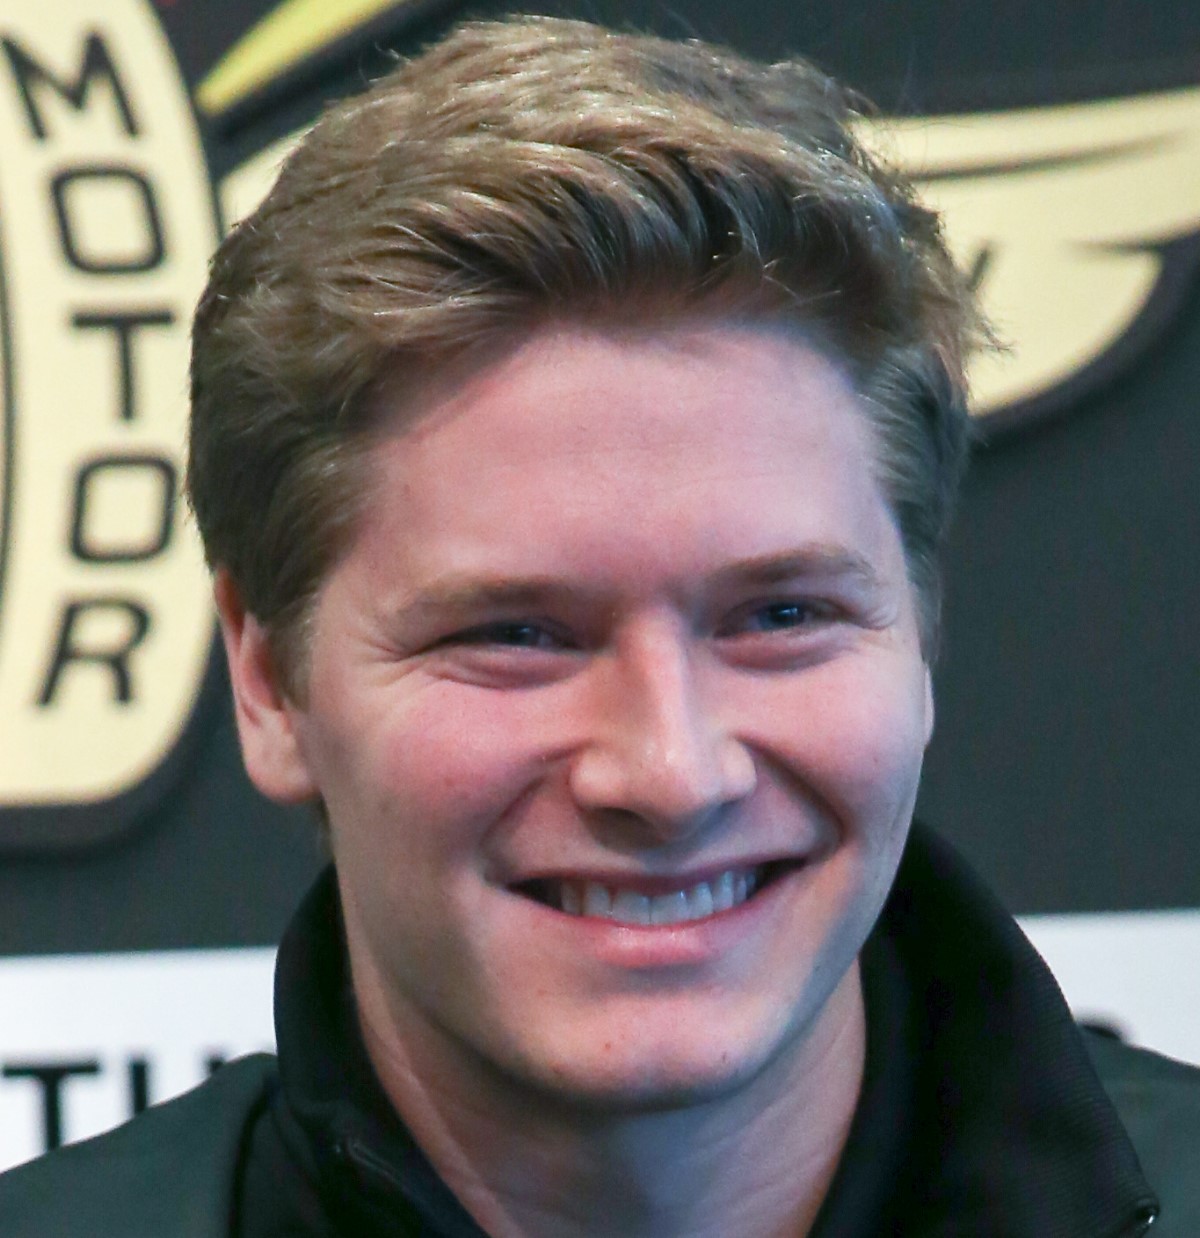 Newgarden has real real reason to smile now - he will be driving an unbeatable Penske Shocks car